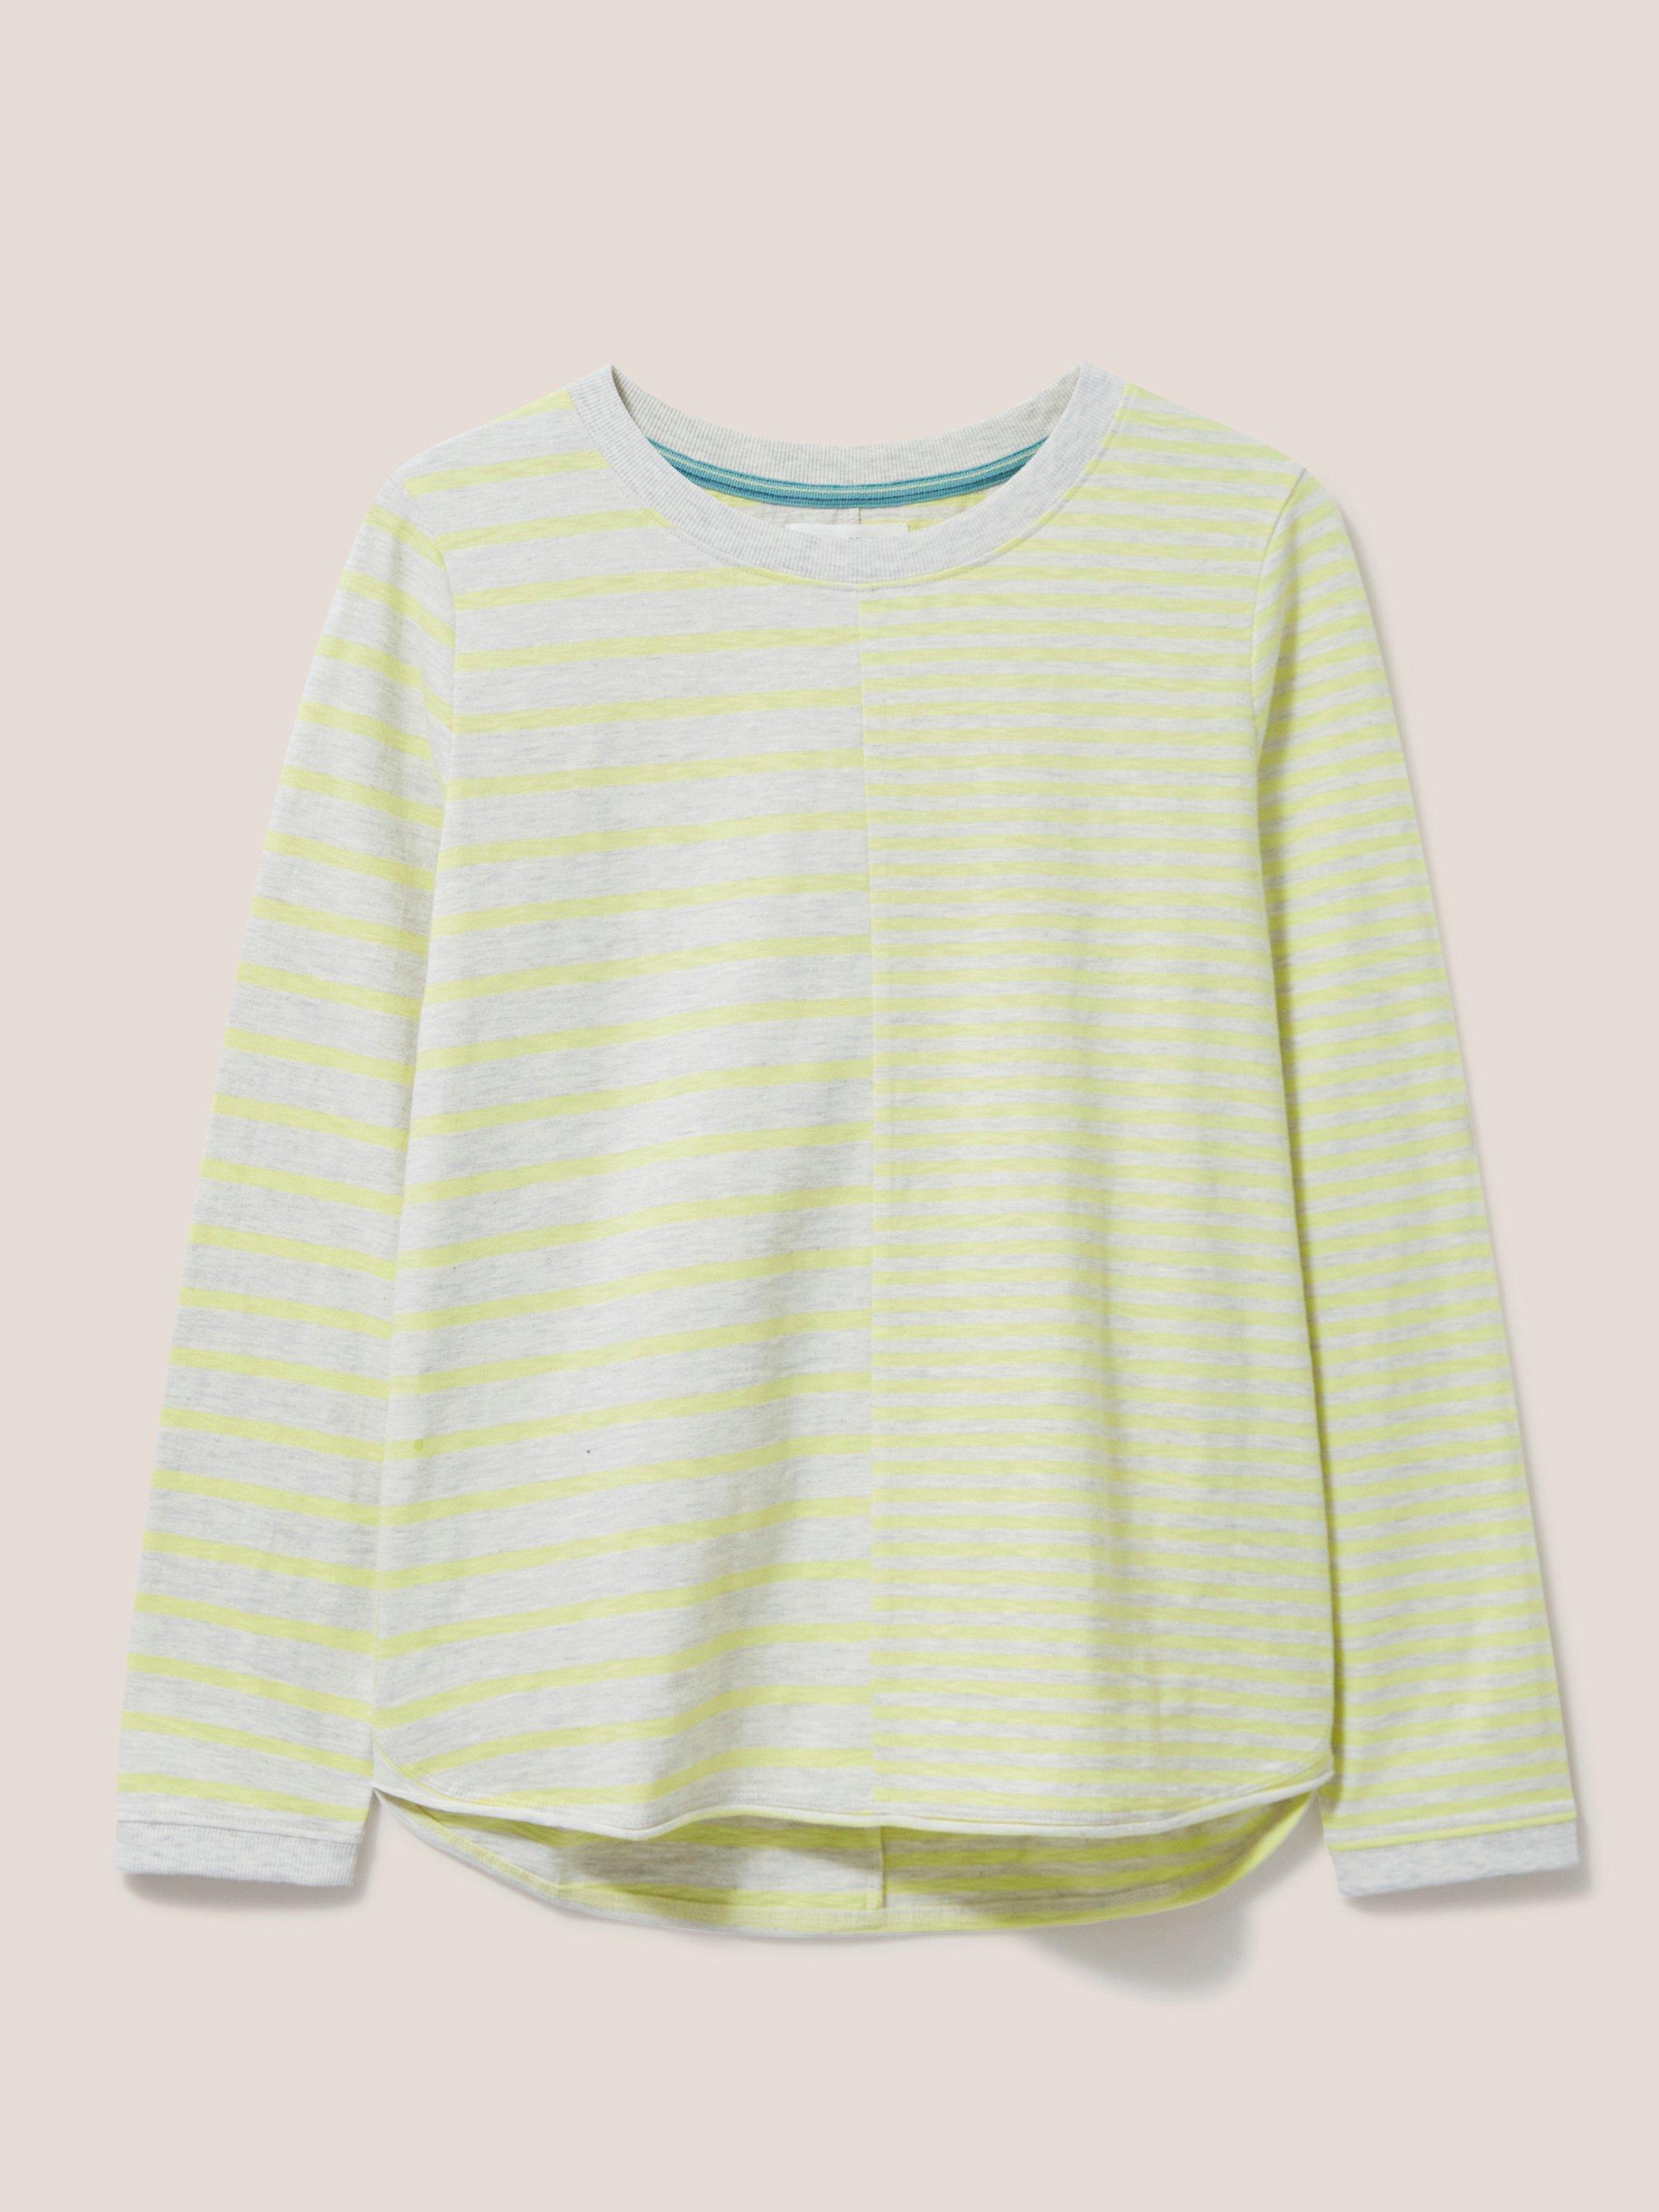 Cassie Stripe T-Shirt in YELLOW MLT - FLAT FRONT